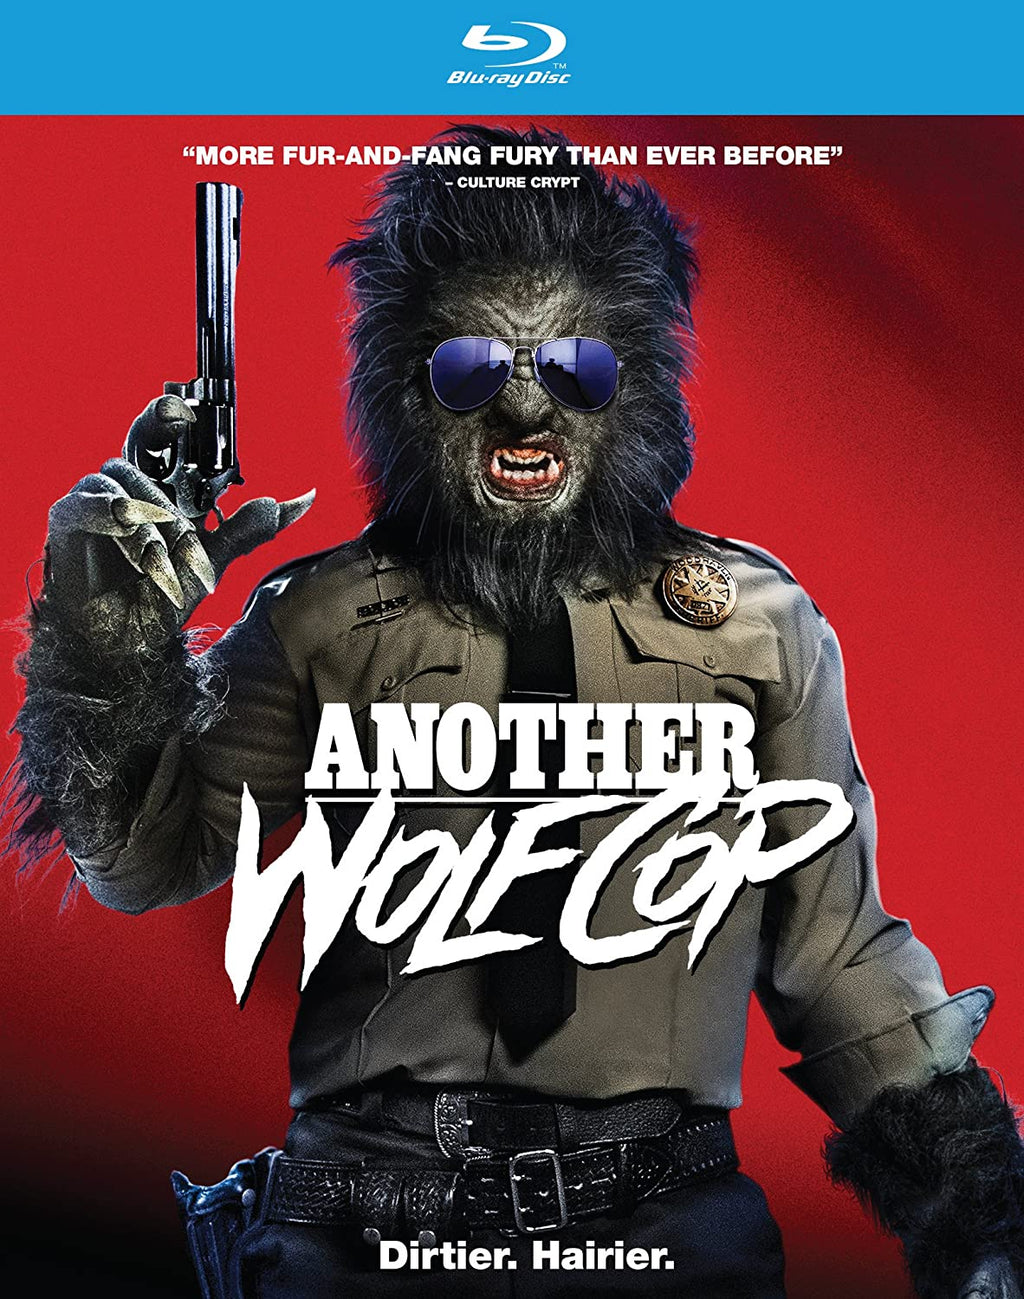 Another Wolfcop Blu-ray